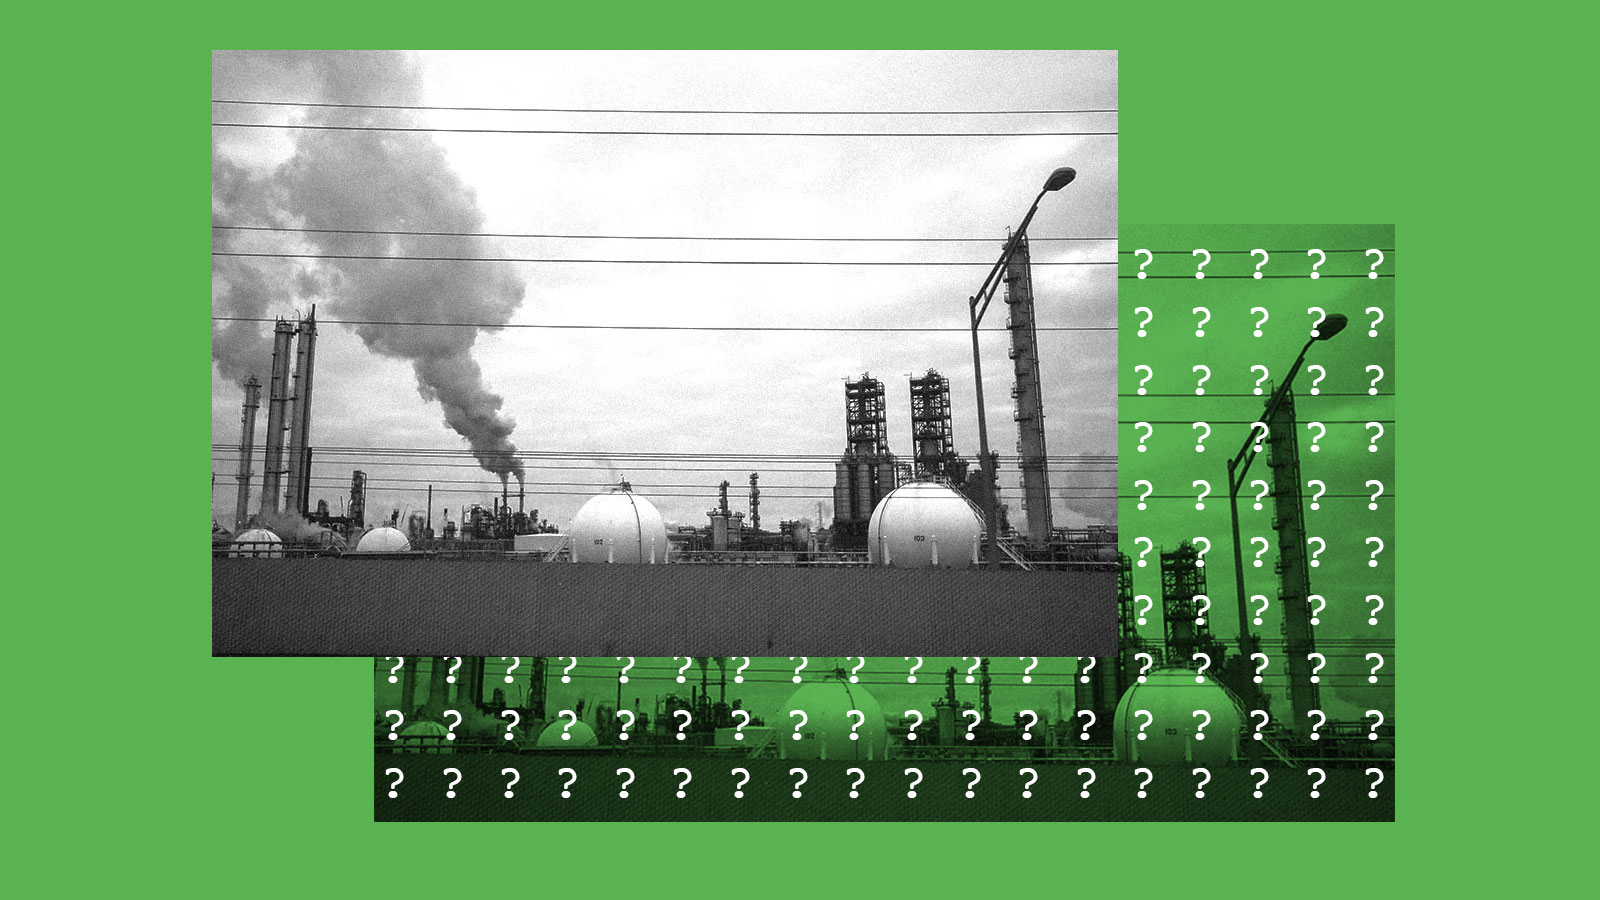 two black and white photos of an oil refinery on a solid green background. one photo is underneath the other and has question marks on top of it